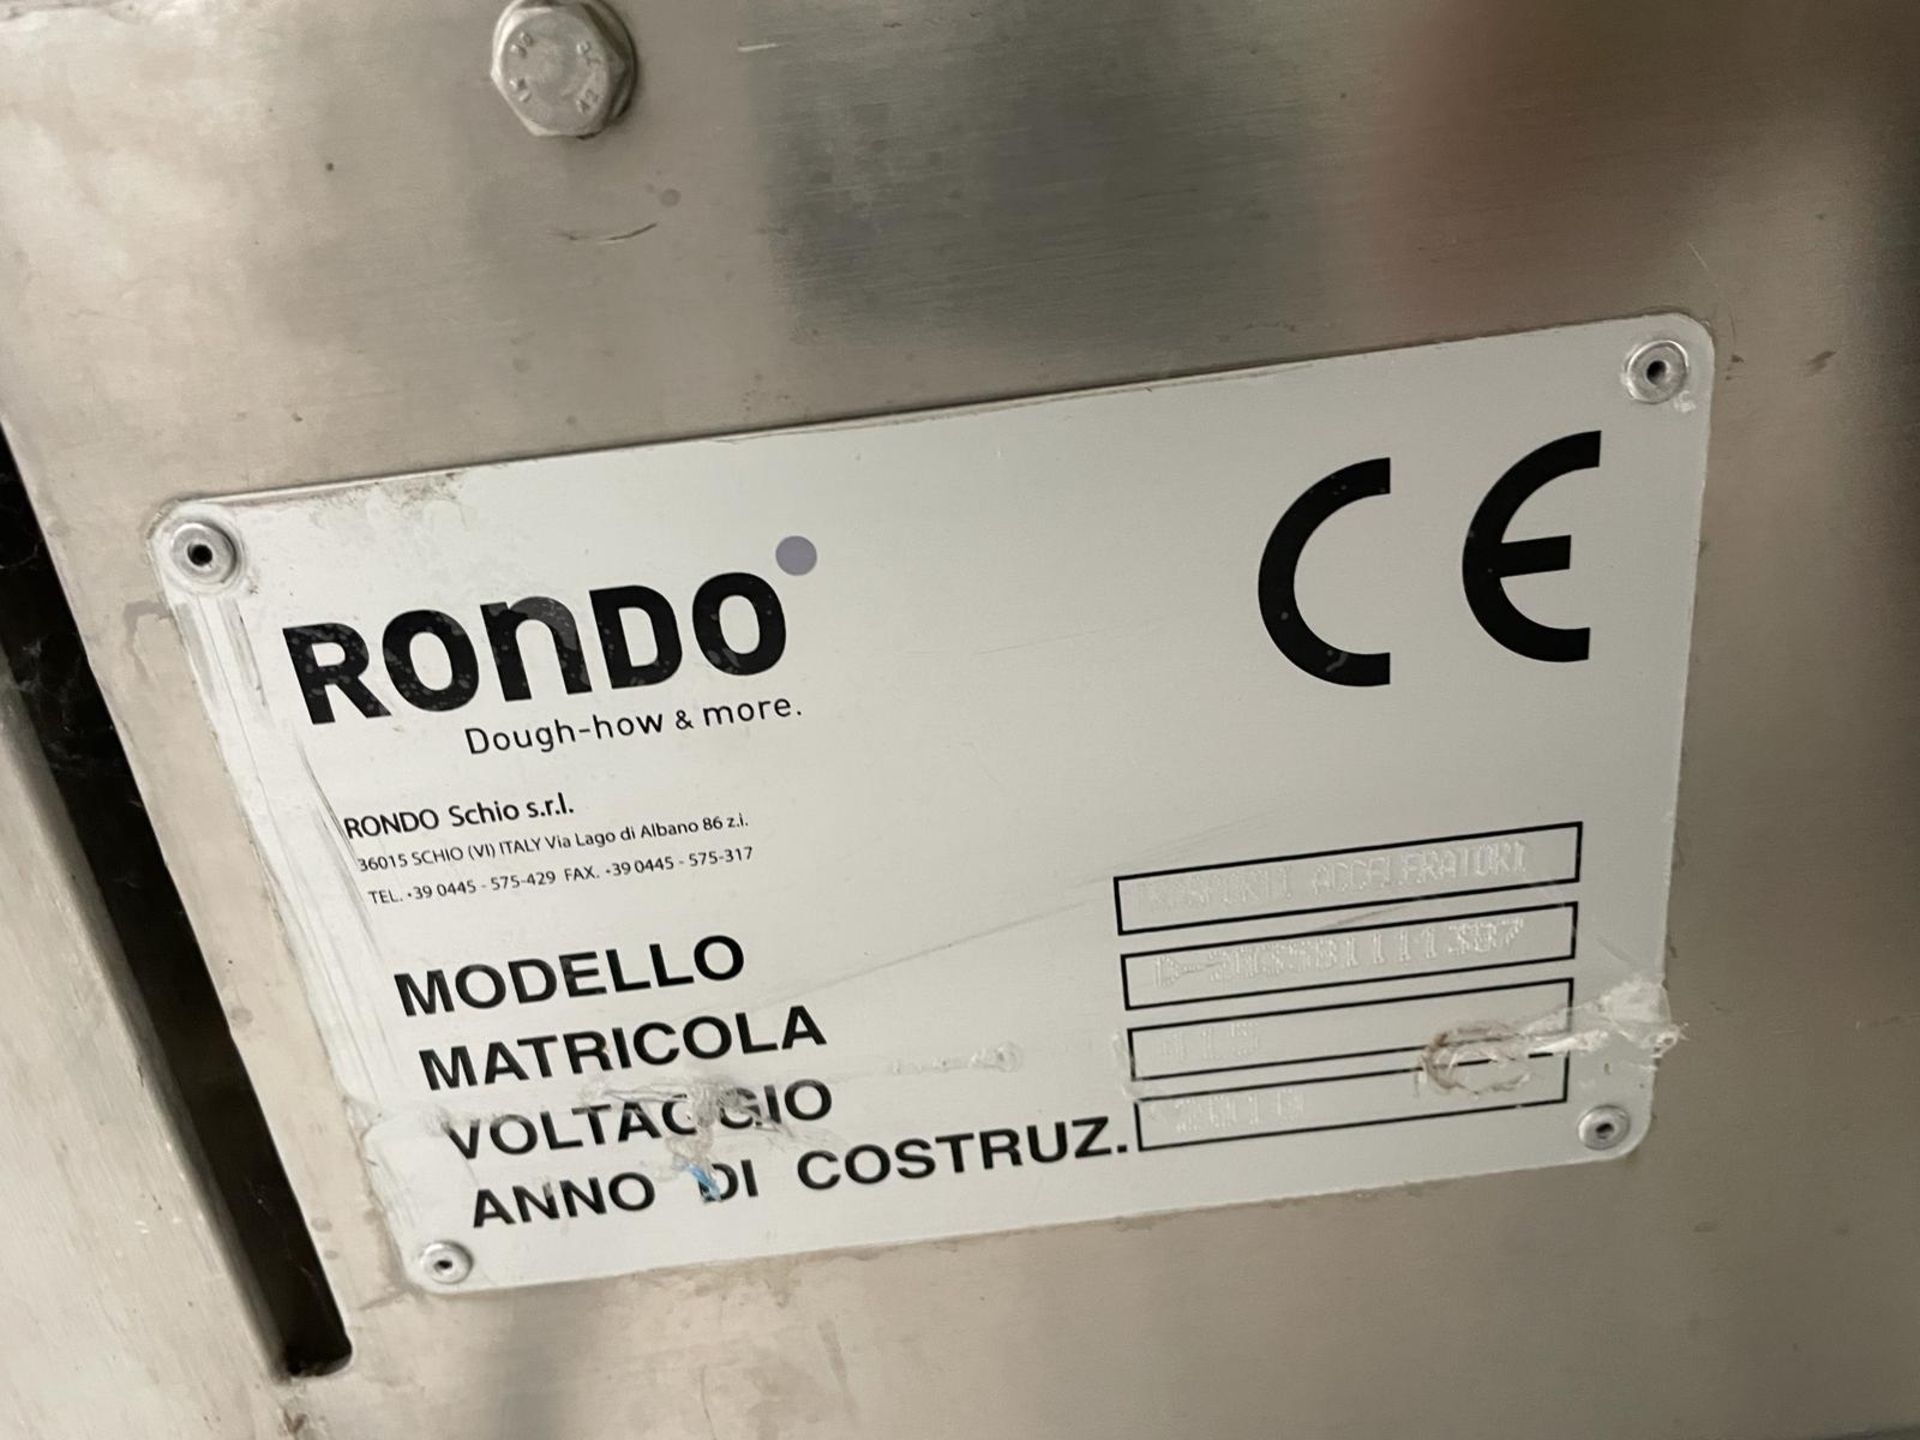 Rondo part conveyor section 1800 x 1200 mm Mobile. Please note this lot is located at Unit 29, Ridge - Image 6 of 6